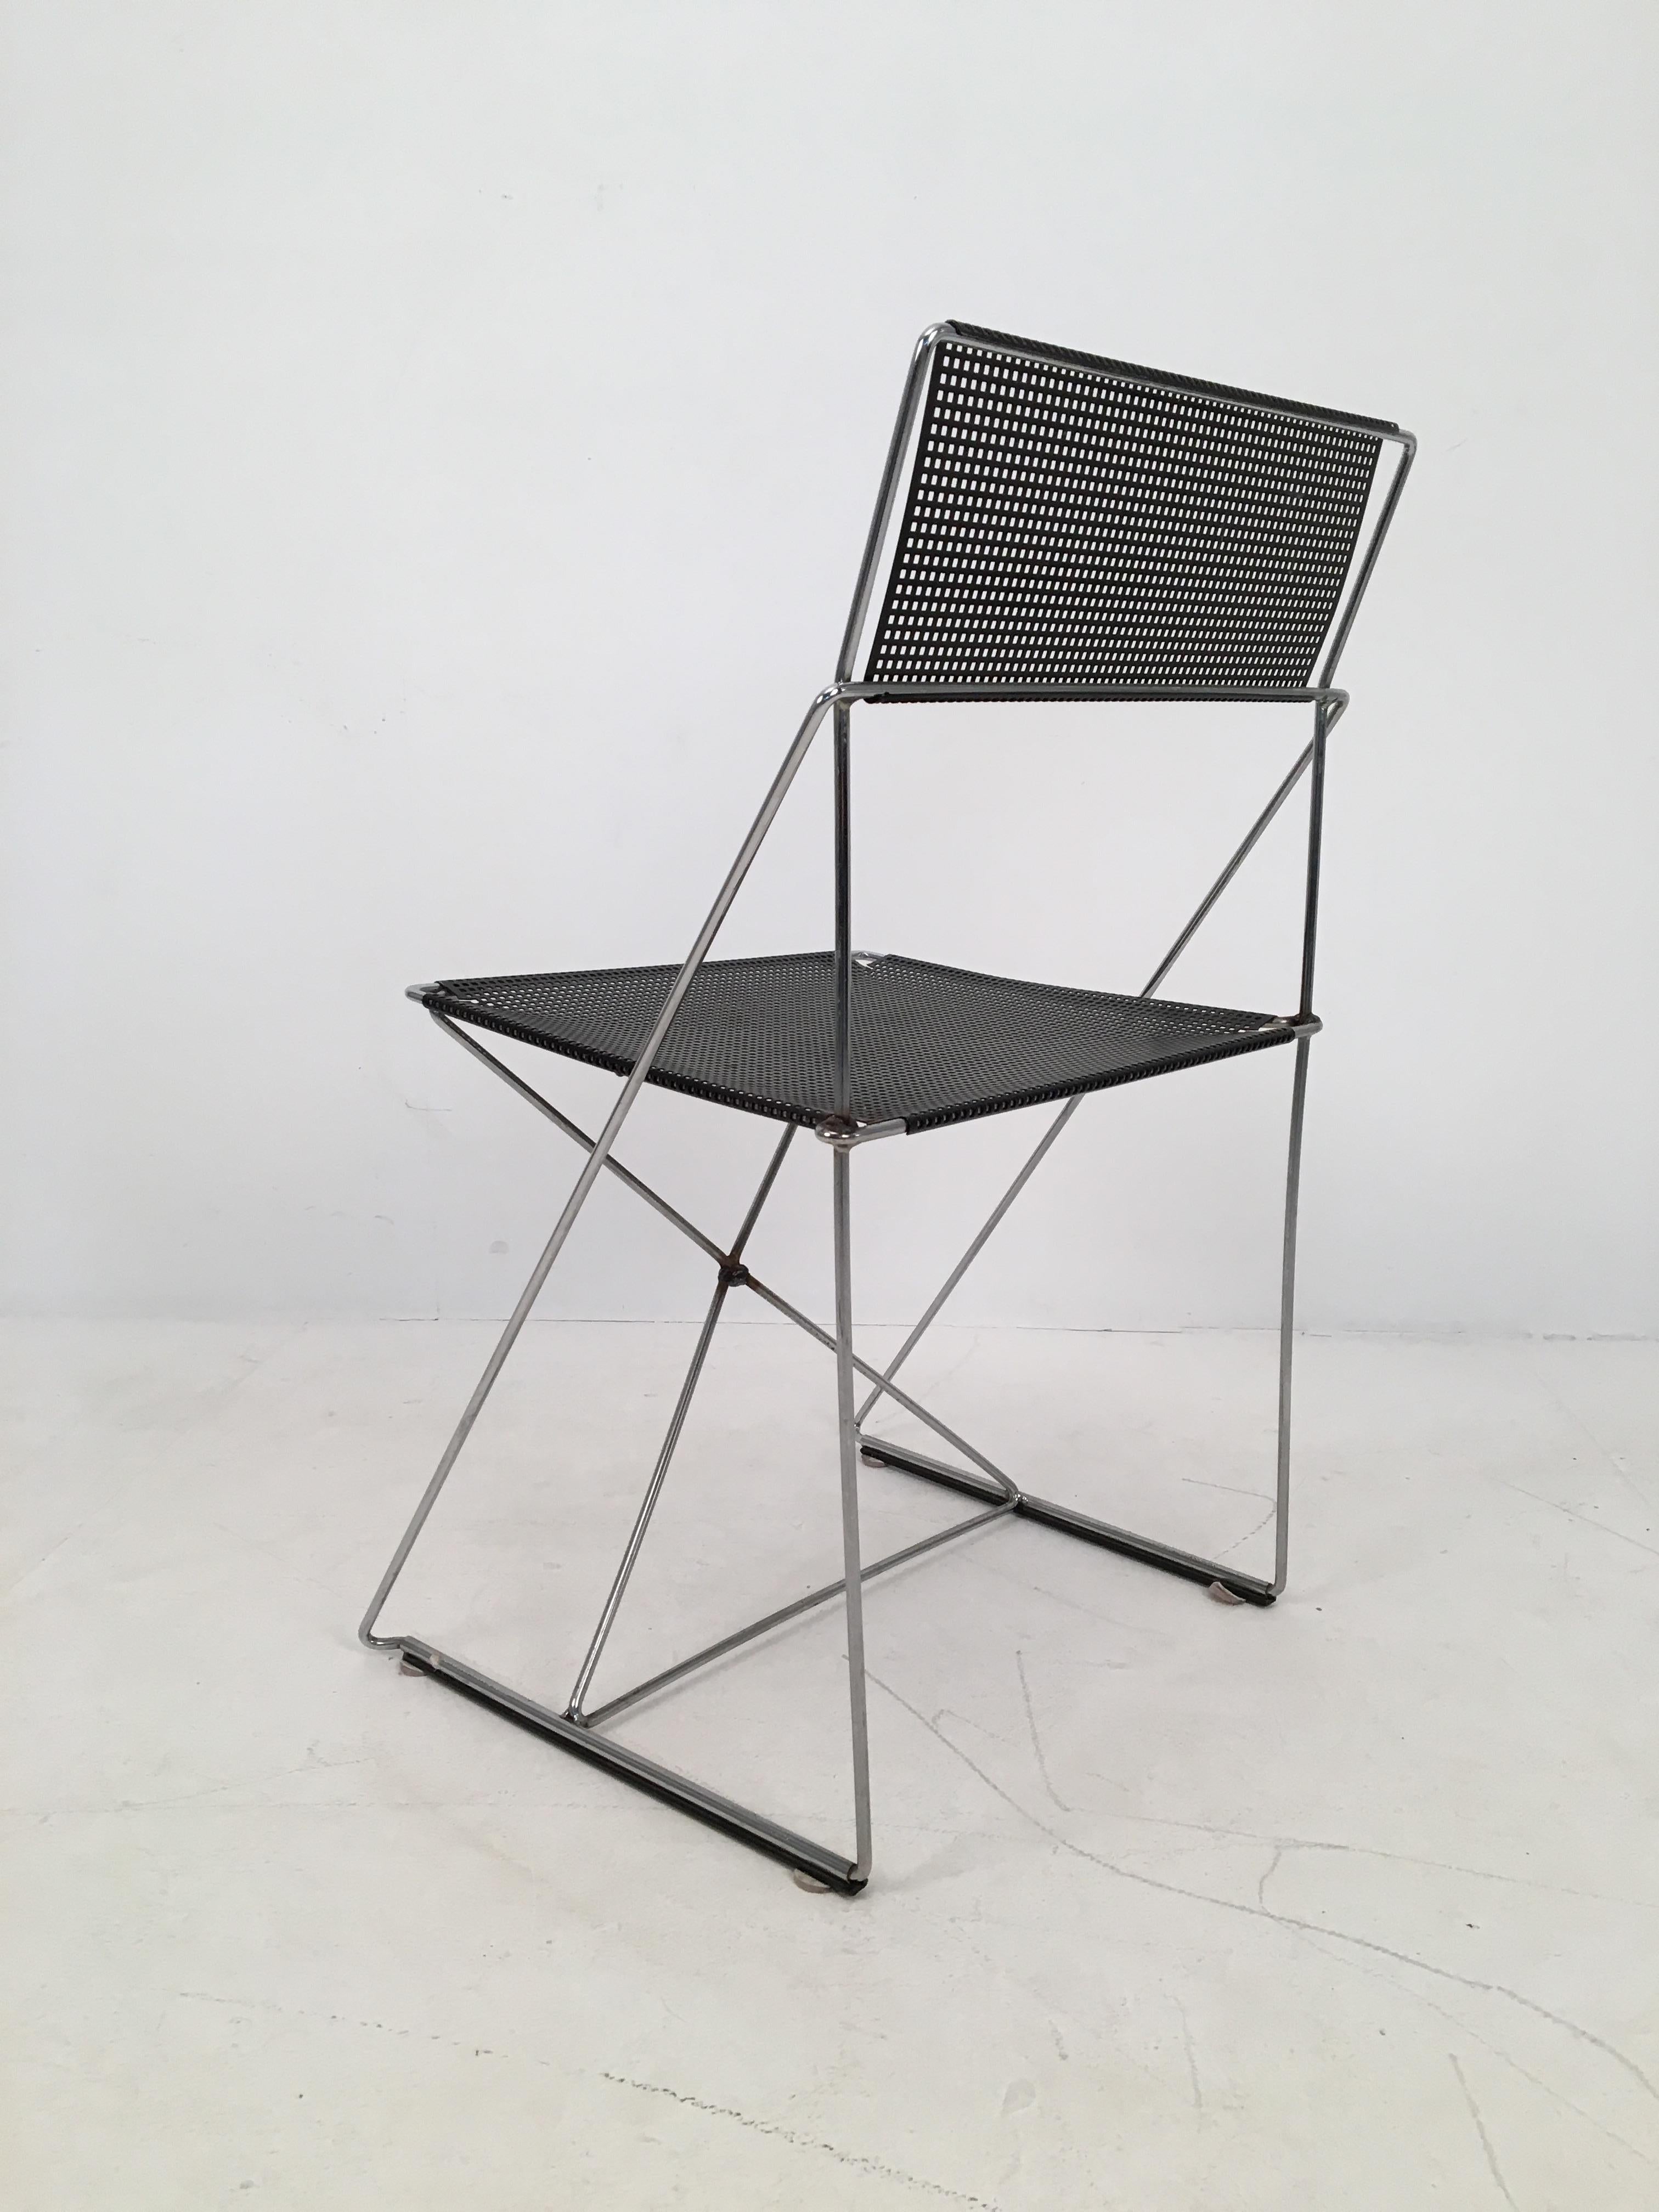 Plated 4 Black Stacking X-Line Chairs by N. J. Haugesen for Hybodan, Denmark circa 1970 For Sale